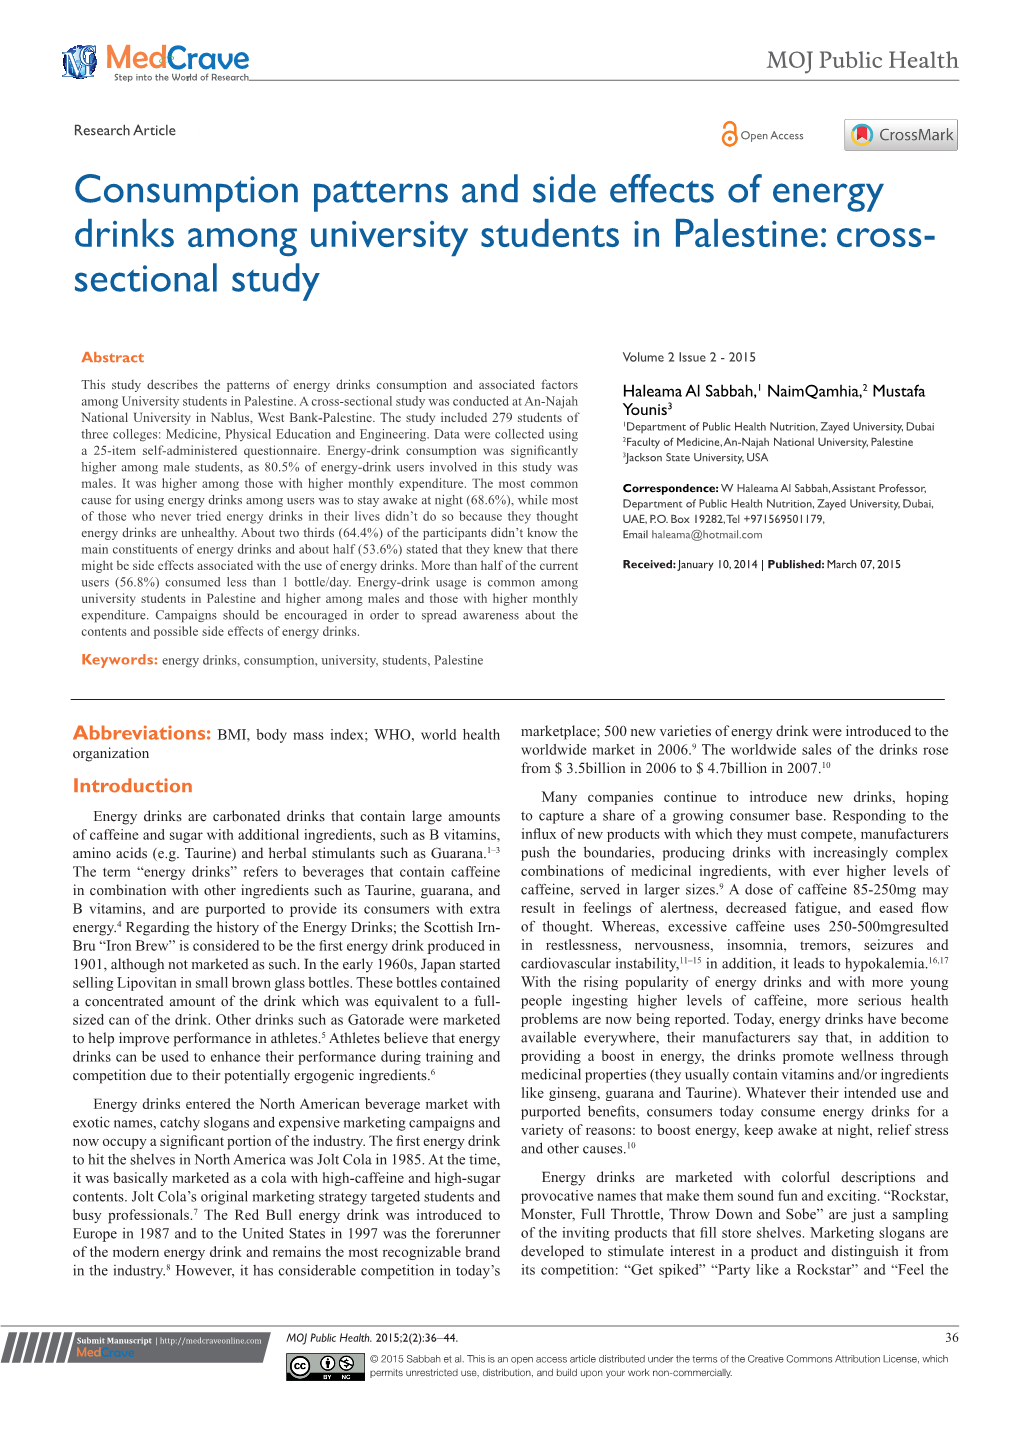 Consumption Patterns and Side Effects of Energy Drinks Among University Students in Palestine: Cross- Sectional Study